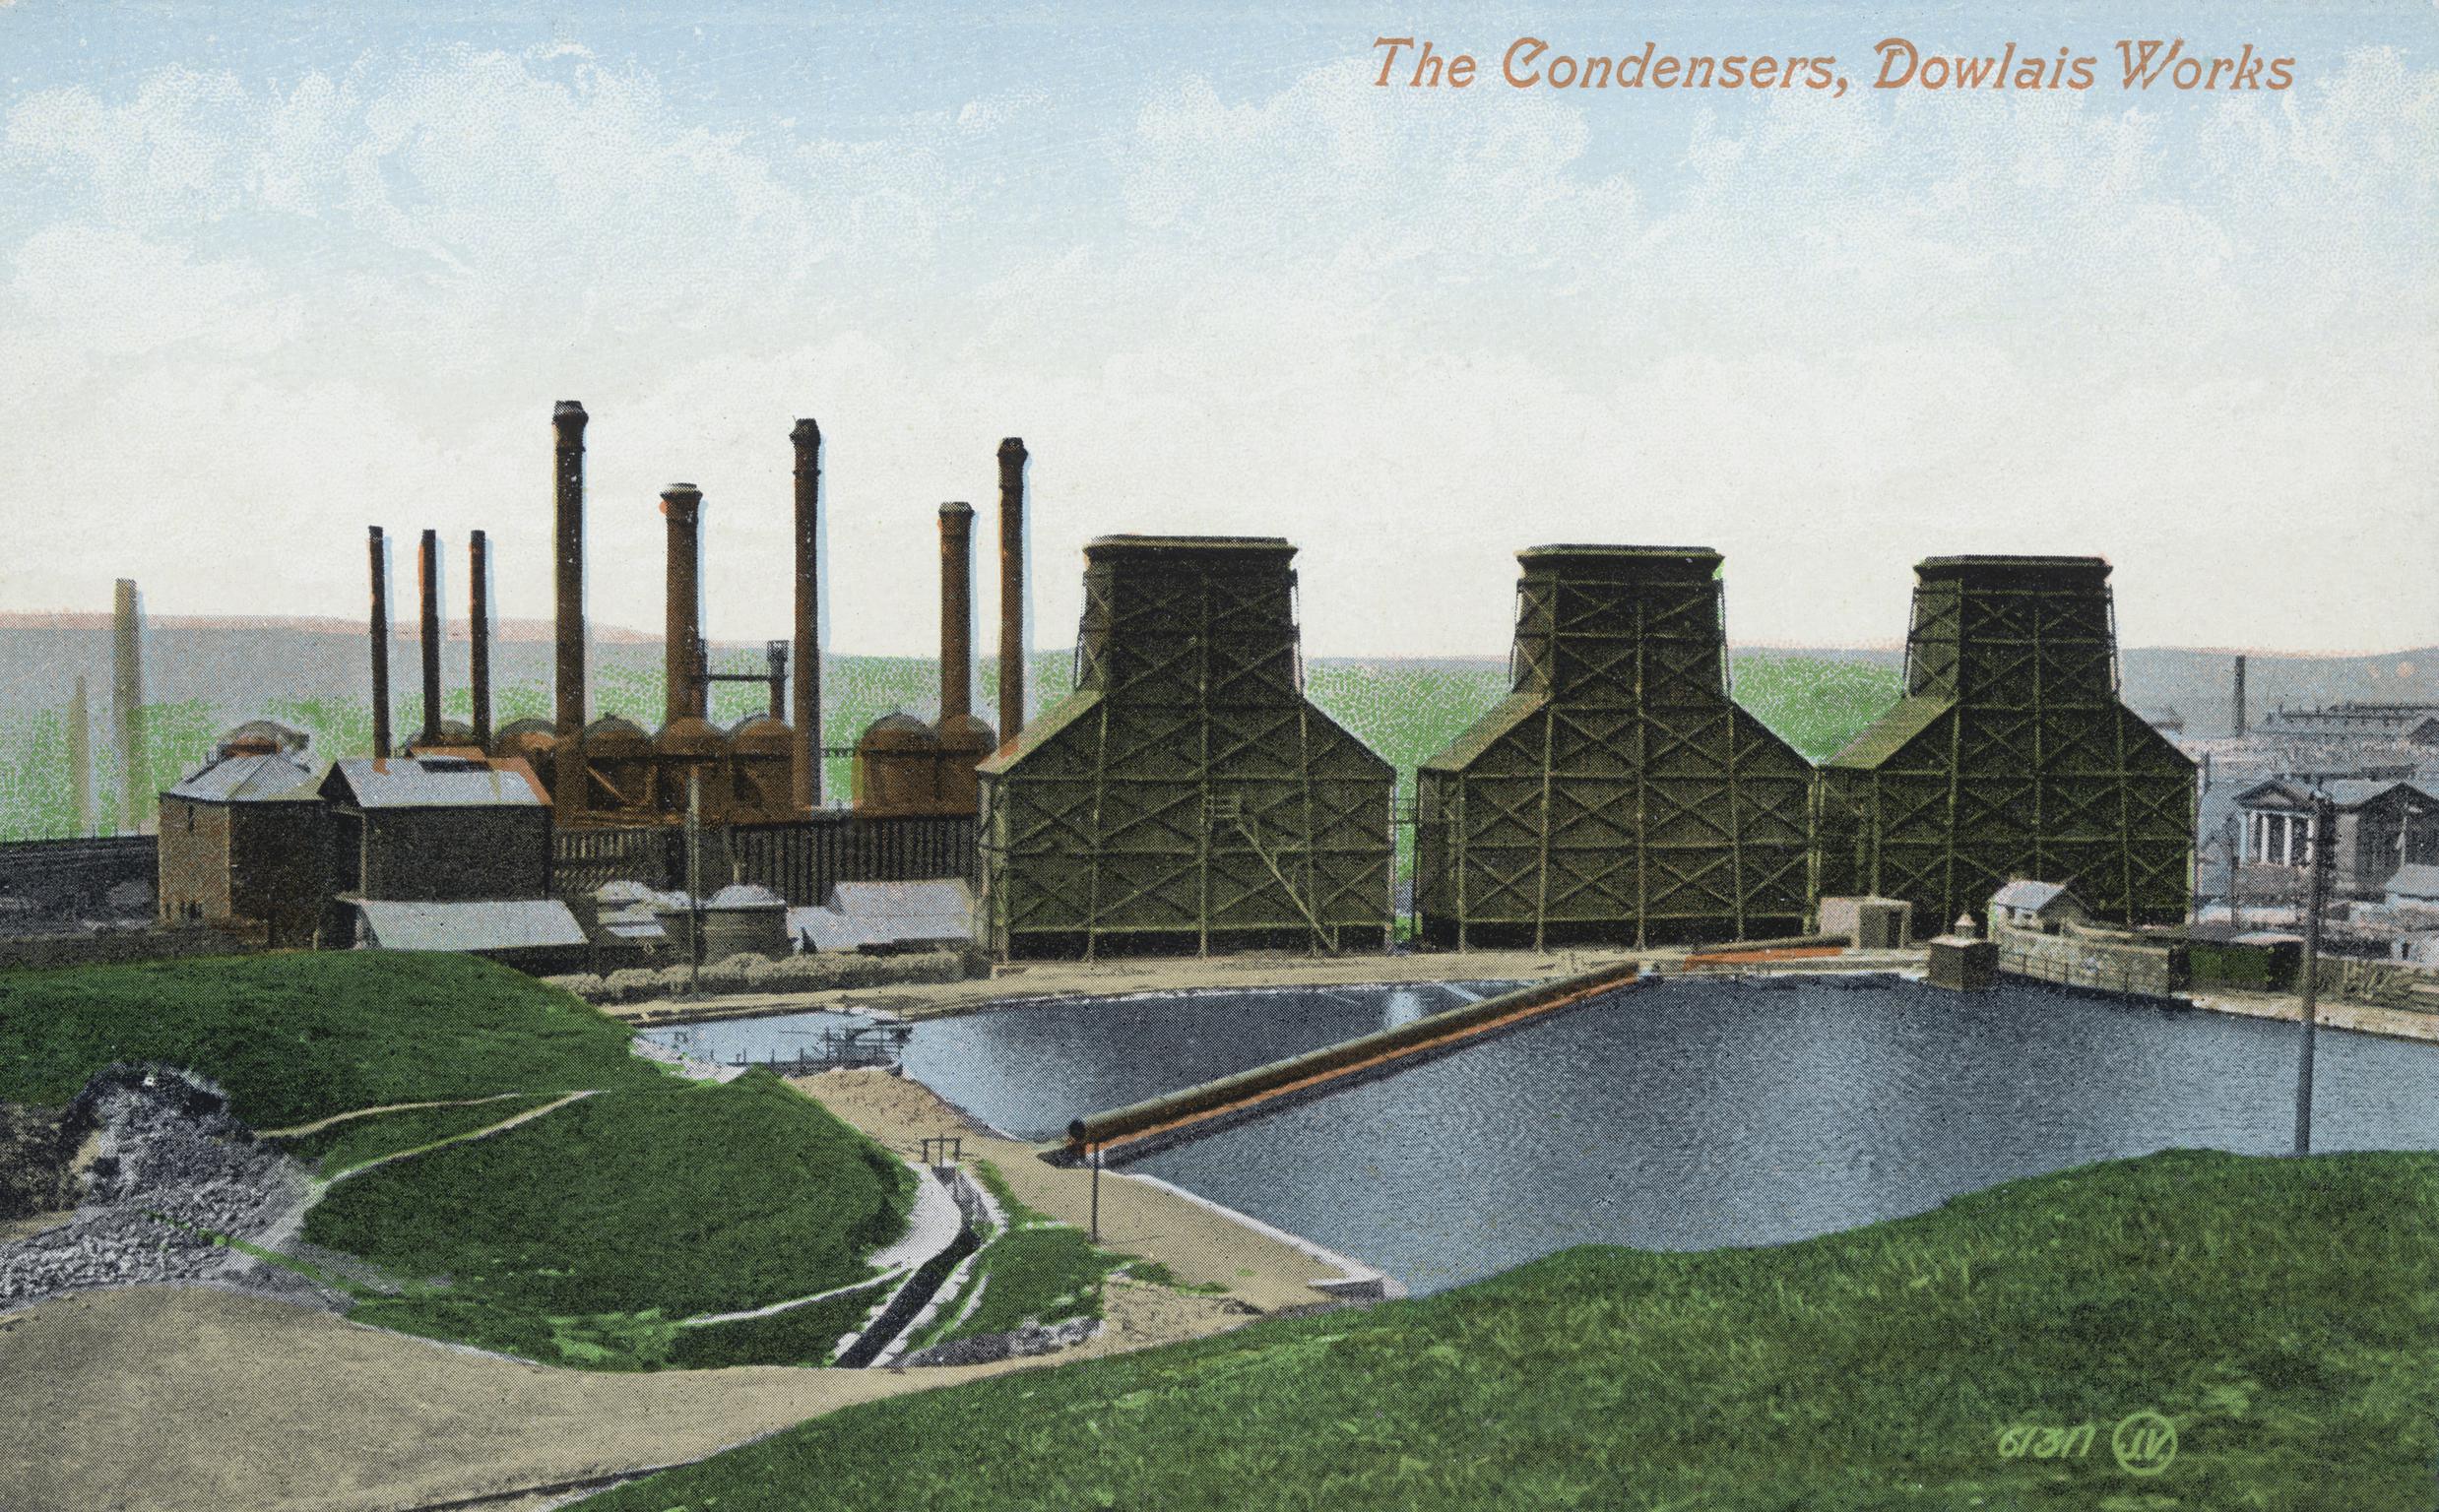 The Condensers, Dowlais Works (postcard)